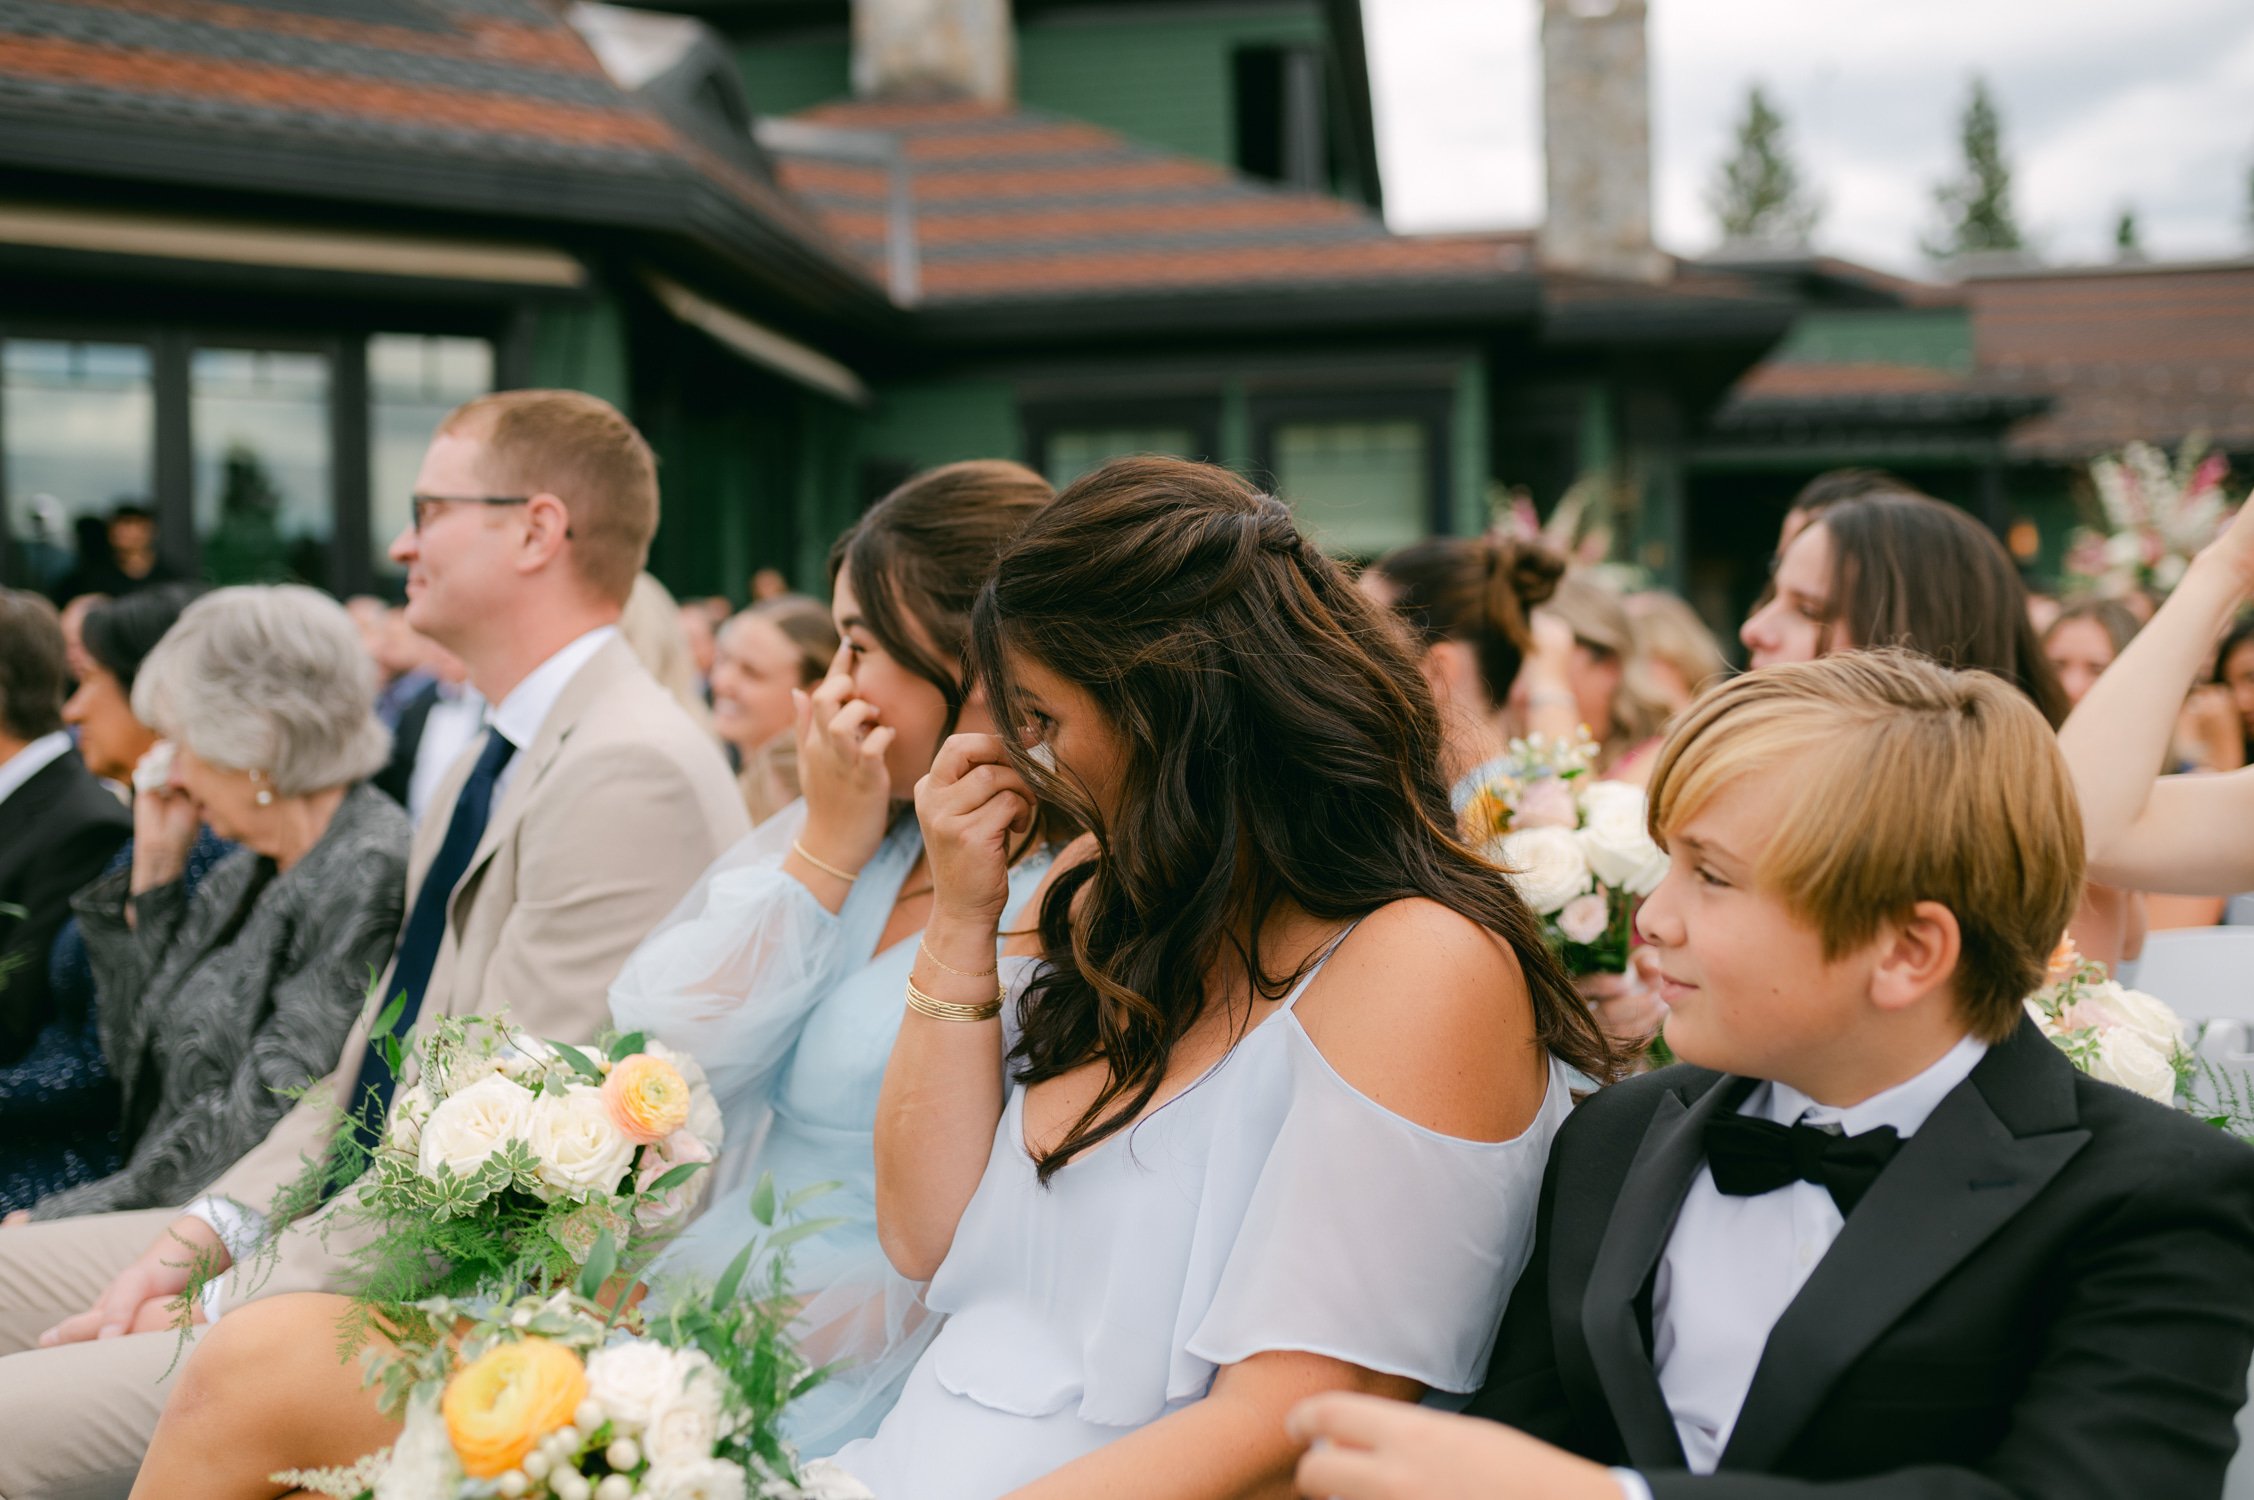 Martis Camp Wedding, photo of the wedding guests being emotional during the vows